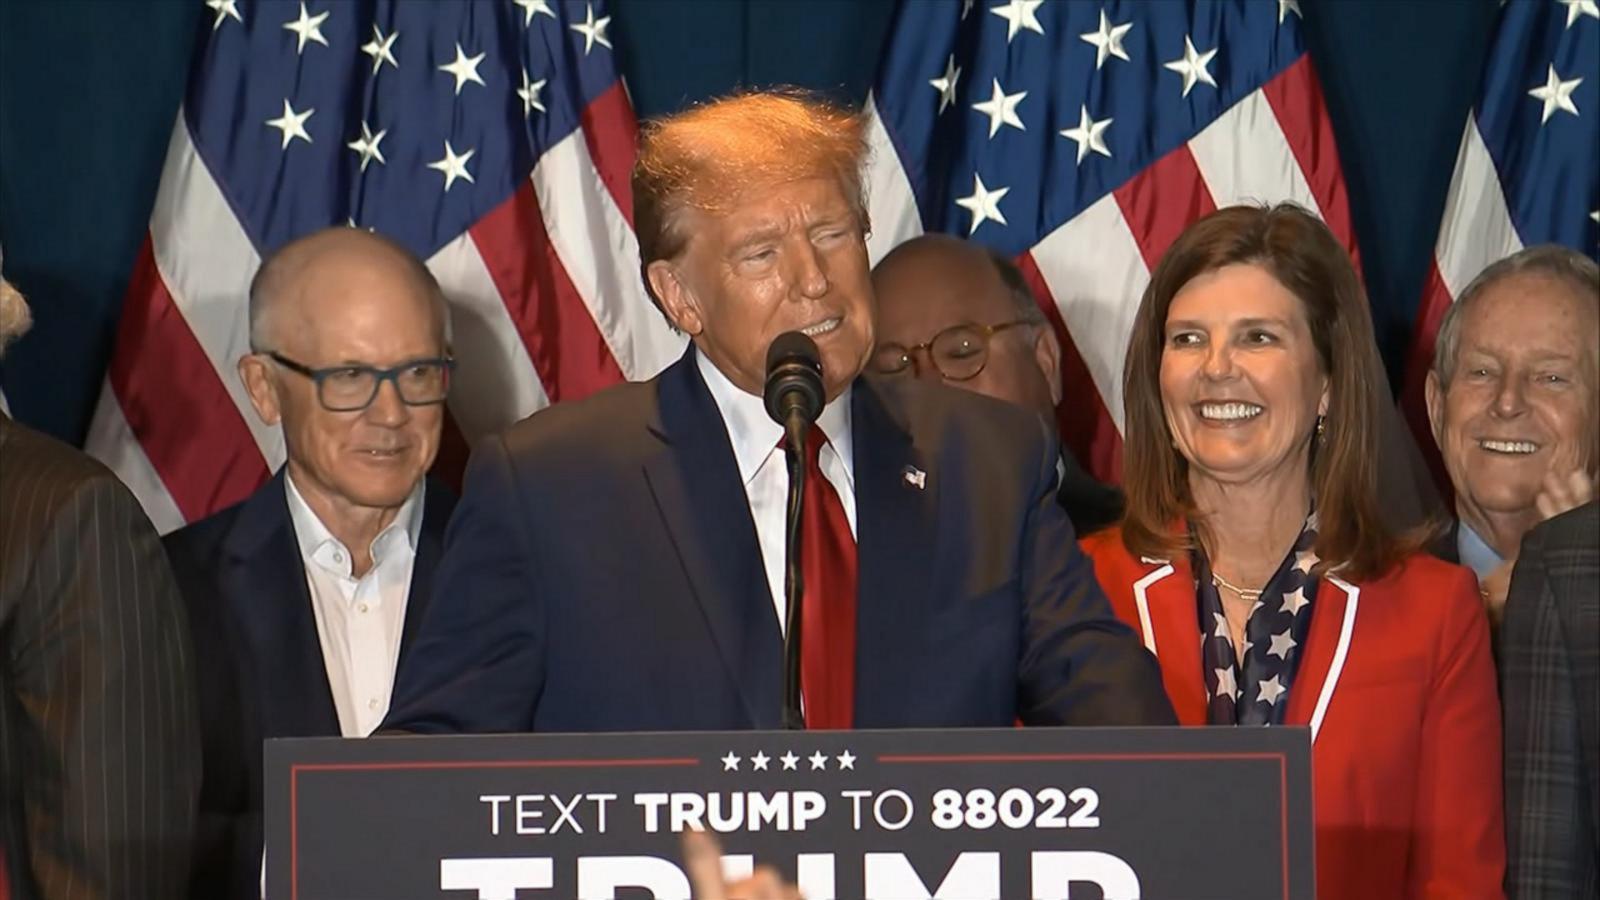 VIDEO: Trumps projected to win Republican South Carolina primary